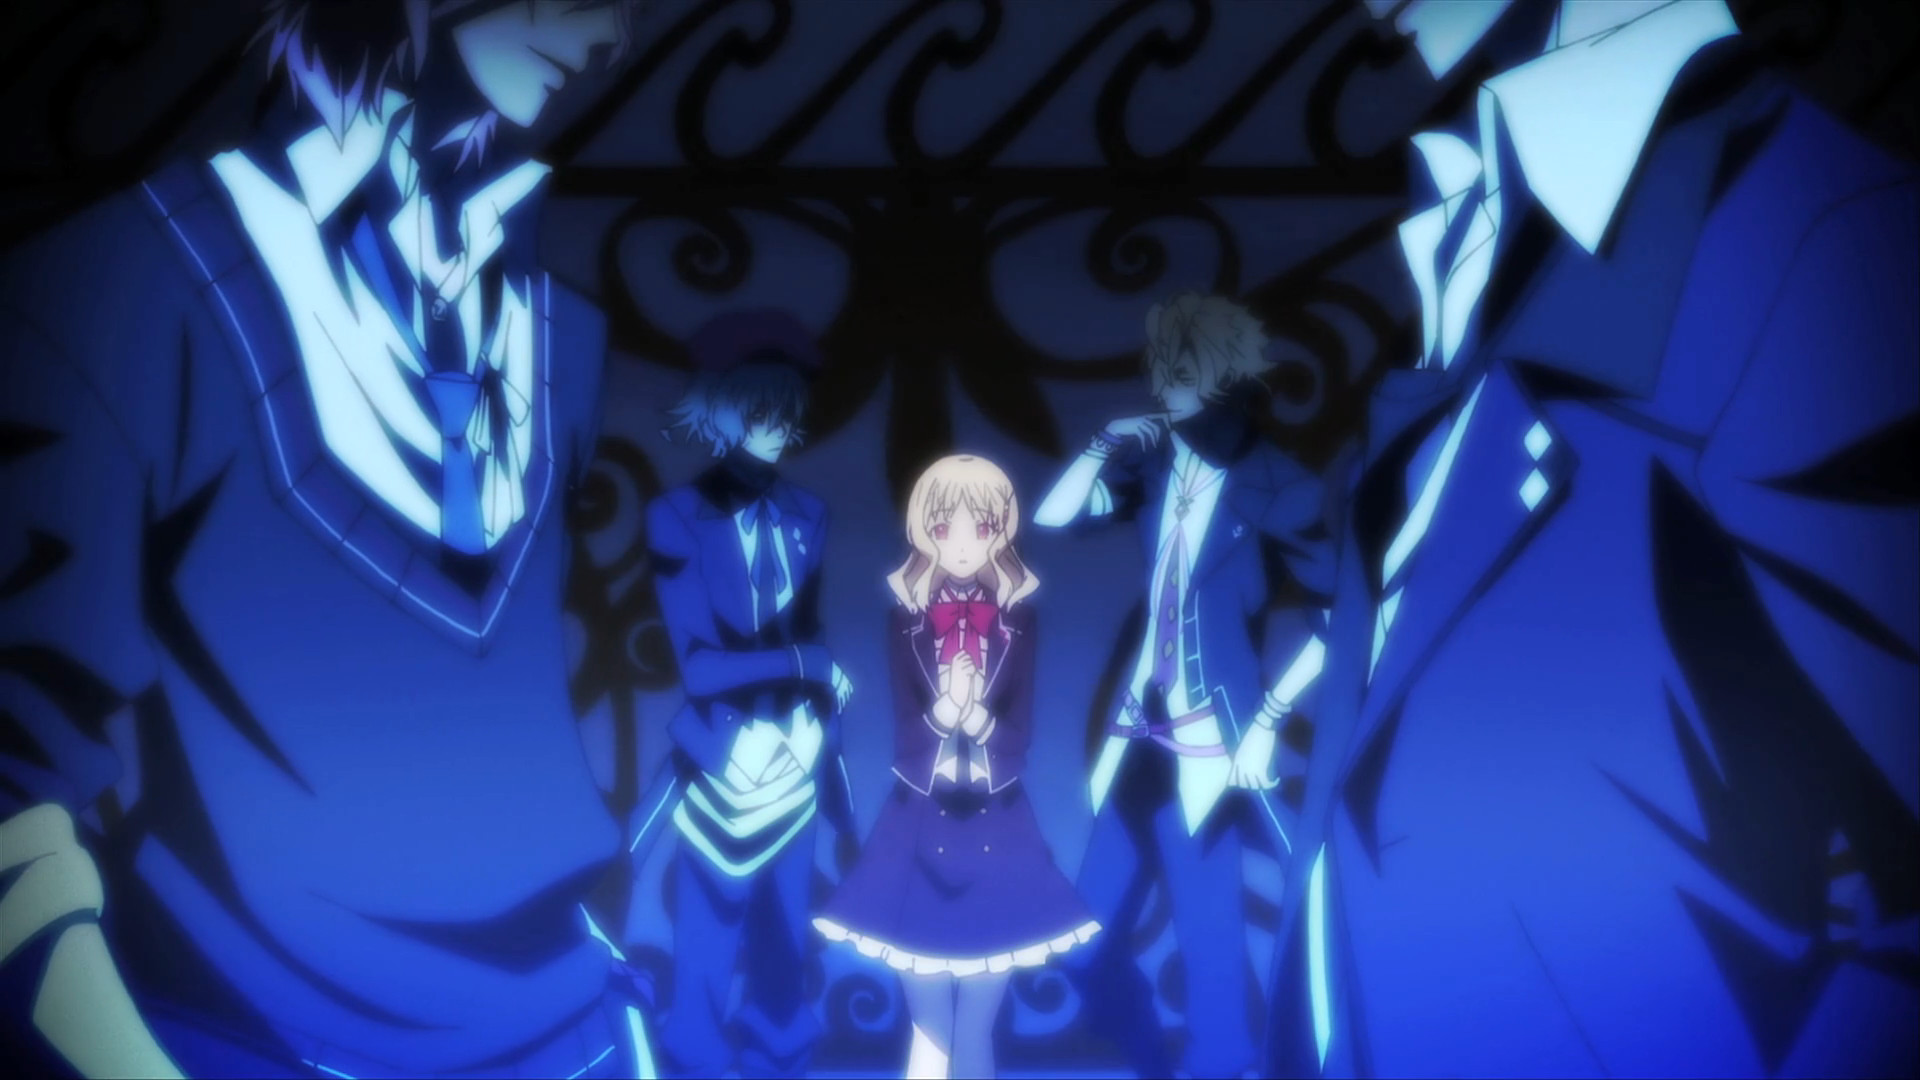 christian daoud recommends Diabolik Lovers Ep 1